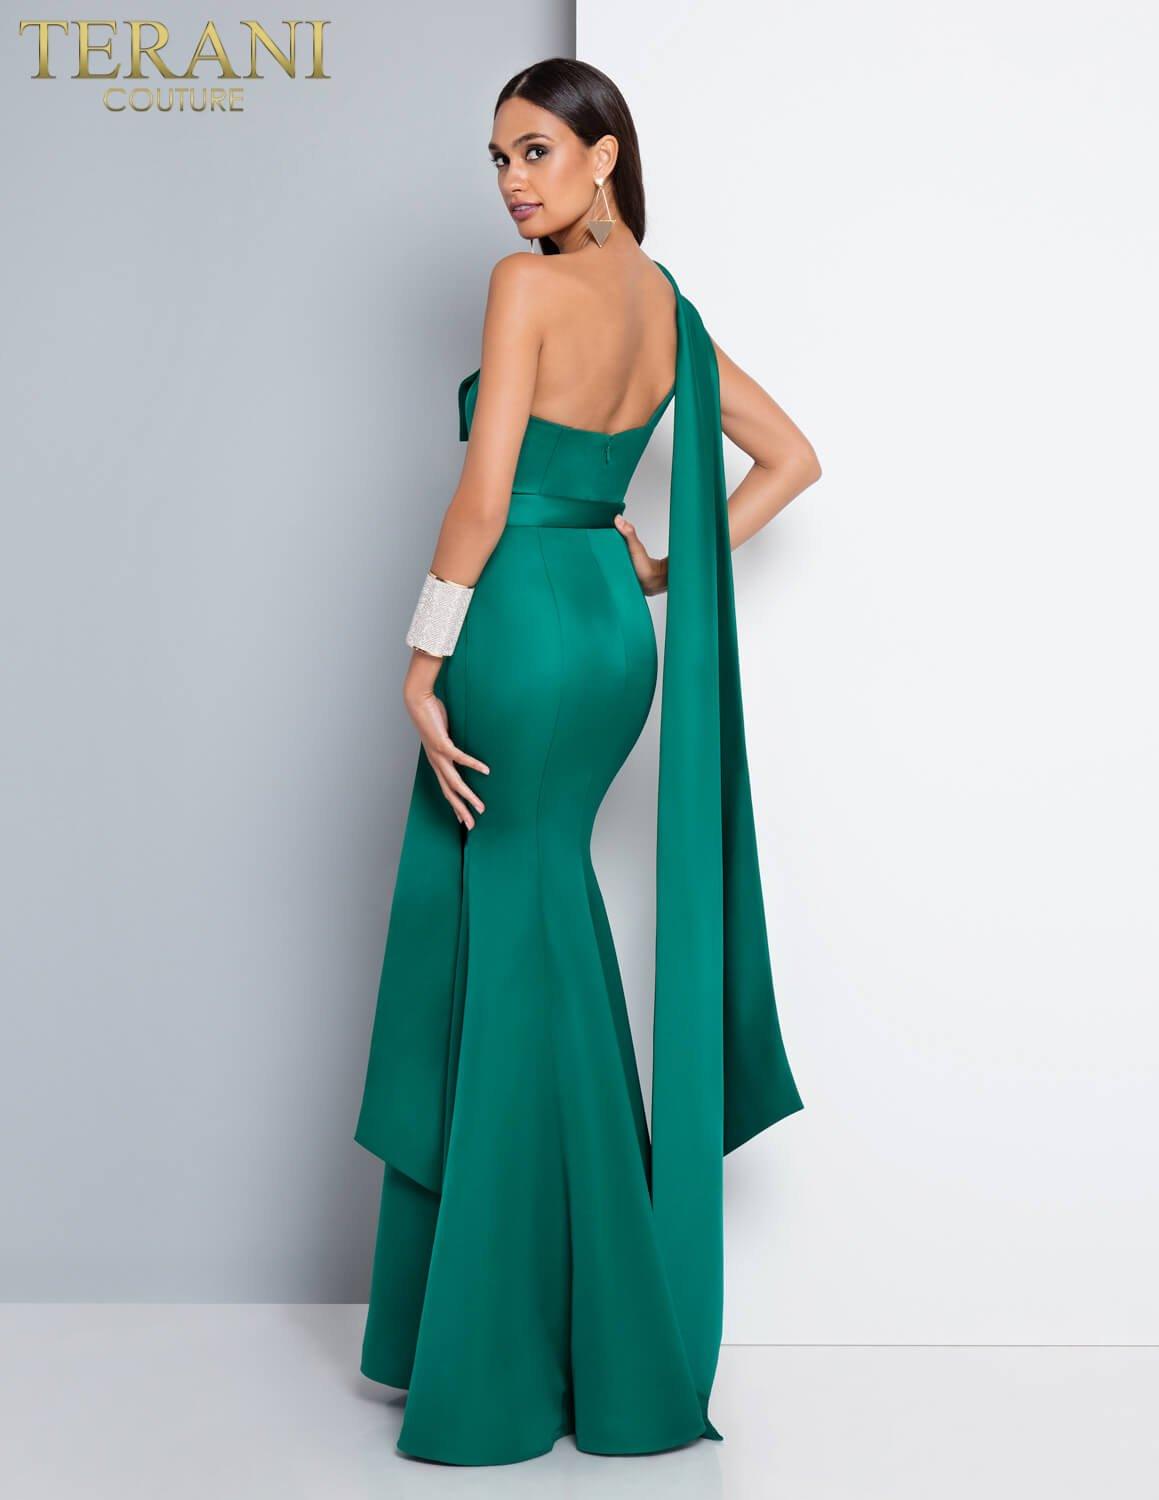 Terani Couture Long Formal Prom Dress Sale - The Dress Outlet